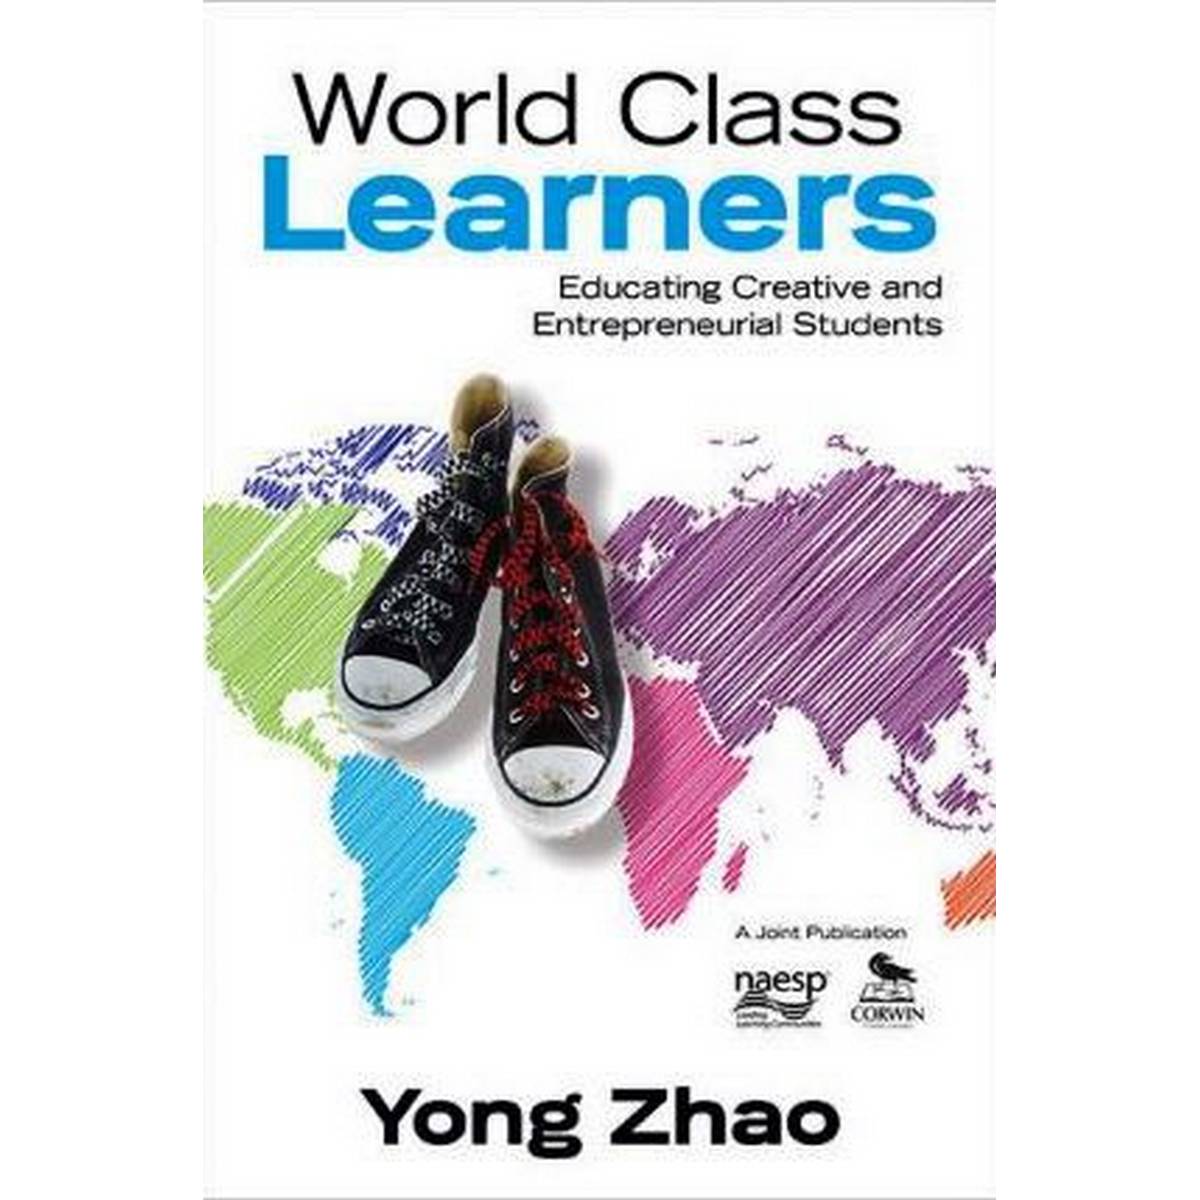 World Class Learners: Educating Creative and Entrepreneurial Students